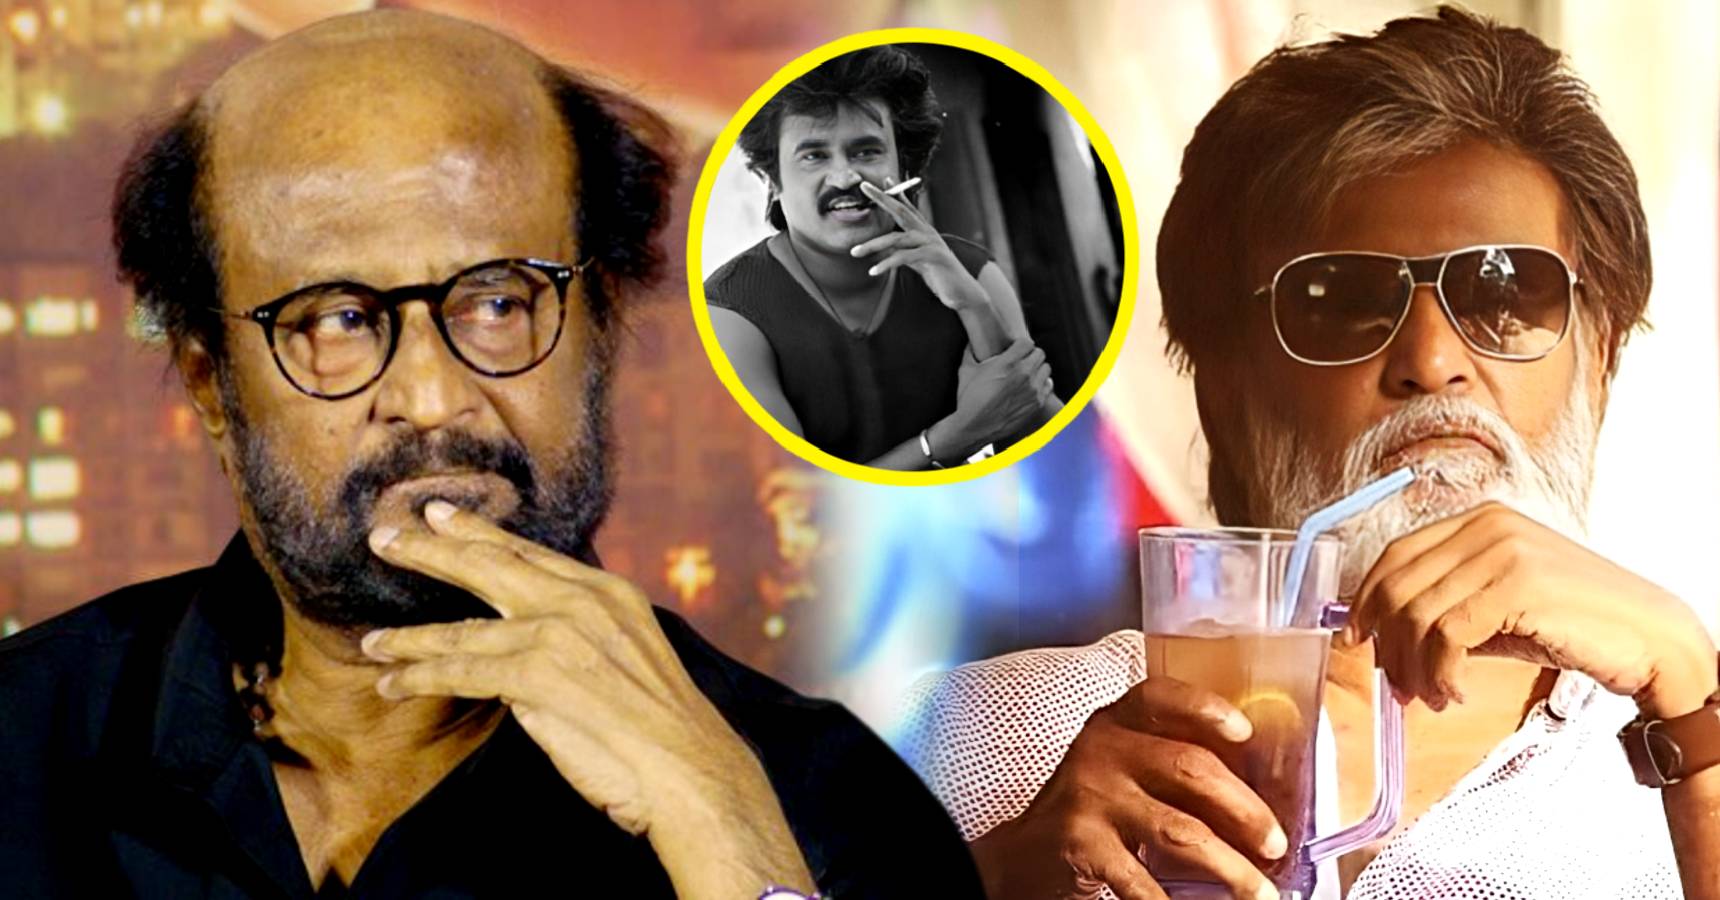 South Indian actor Rajinikanth opens up about alcoholism said it’s his biggest mistake